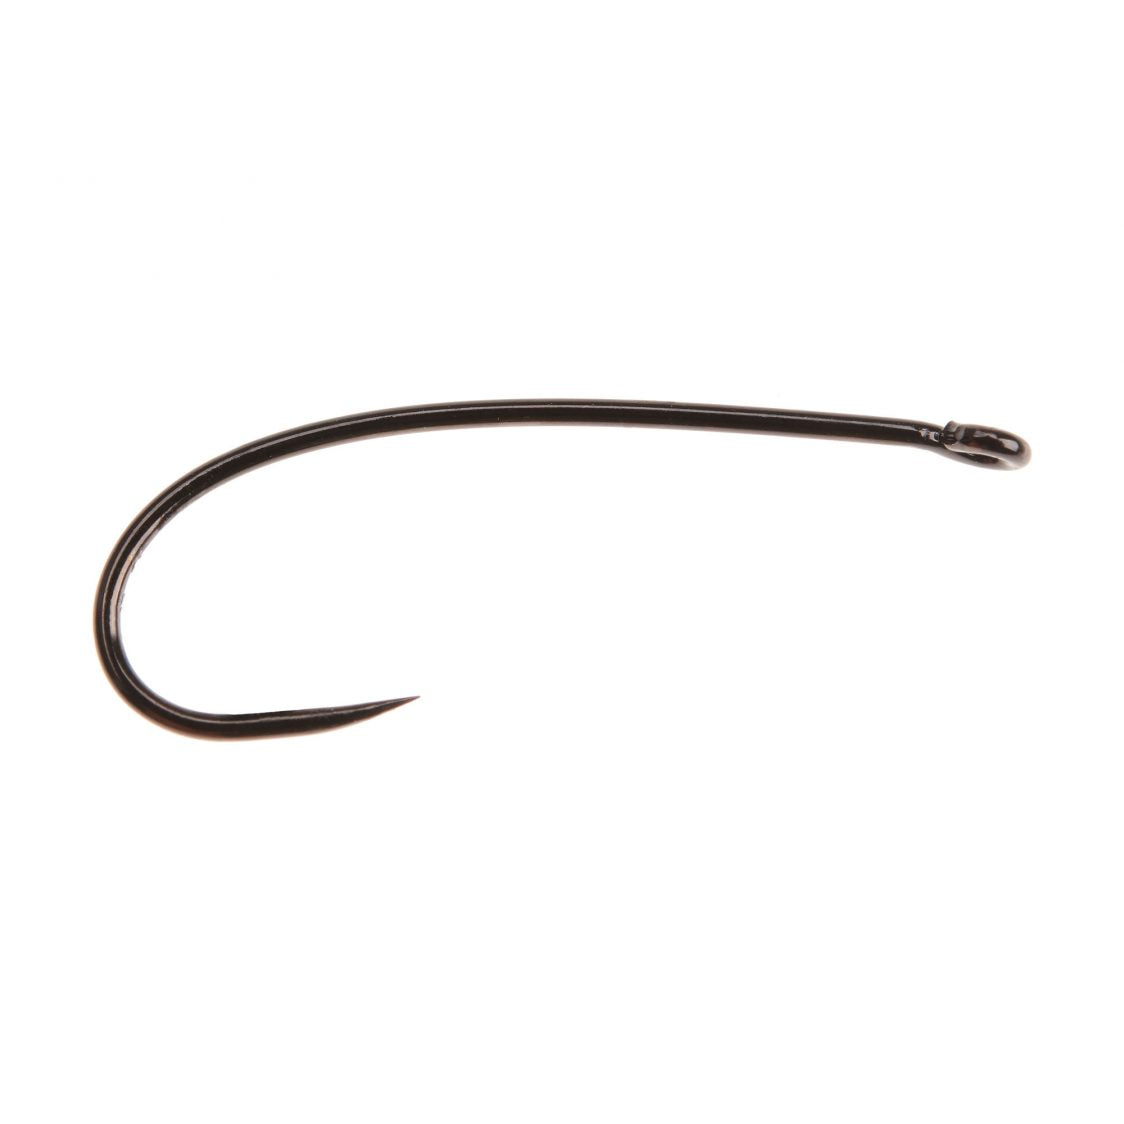 FW531 - Sedge Dry Hook, Barbless – Gaspé Fly Company